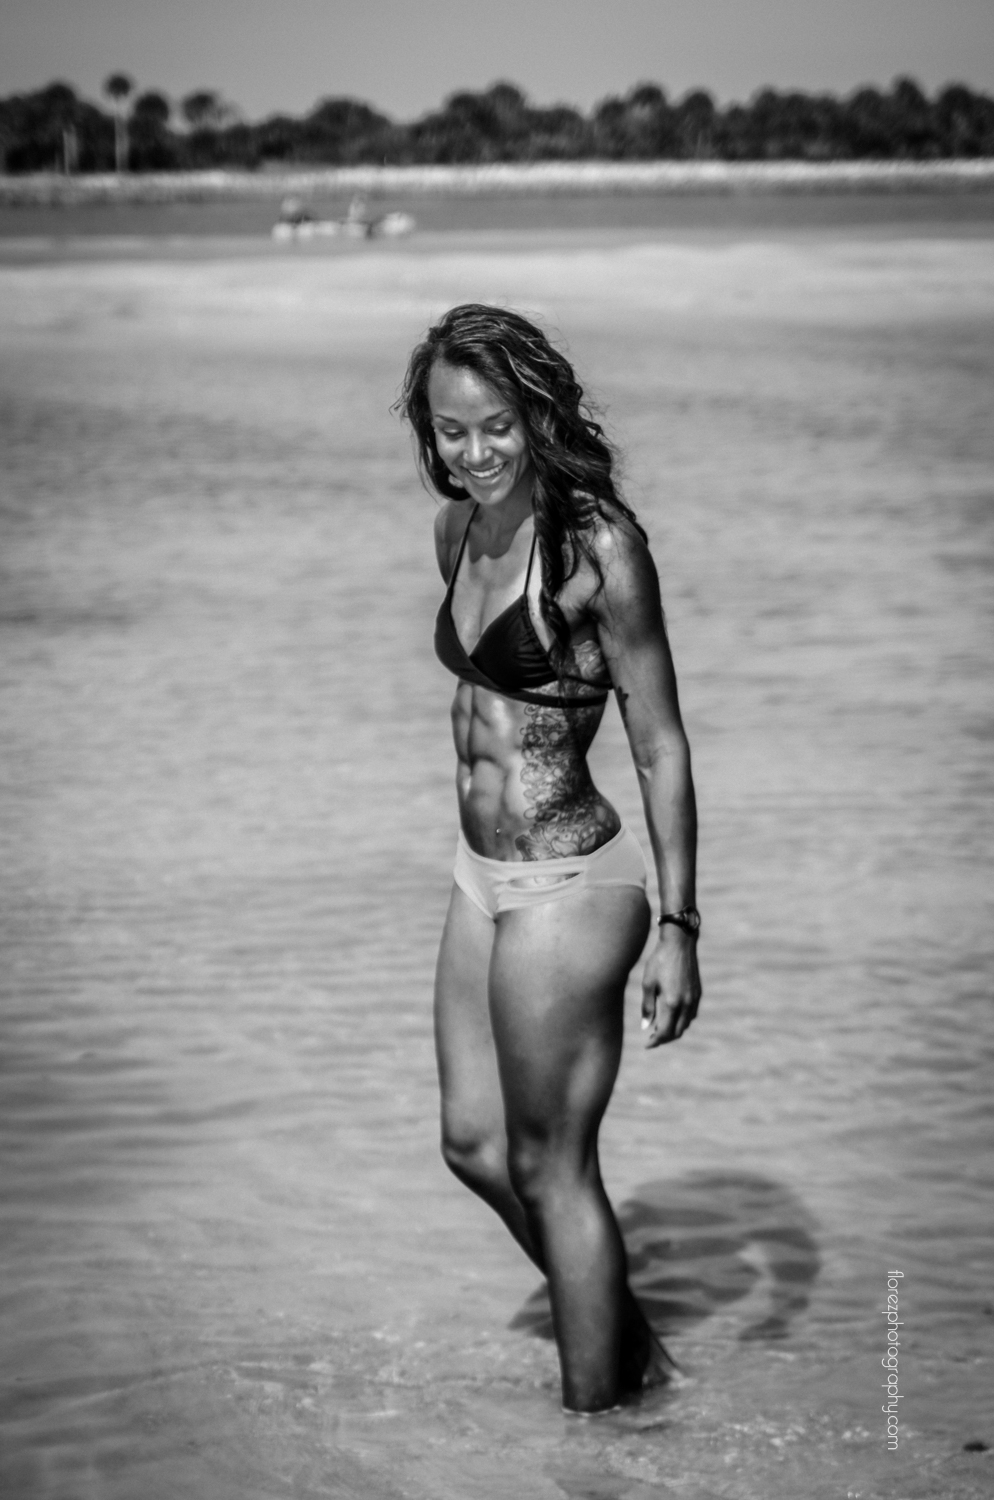 Speaking of updates, Chantae McMillan made the ESPN Body Issue! 